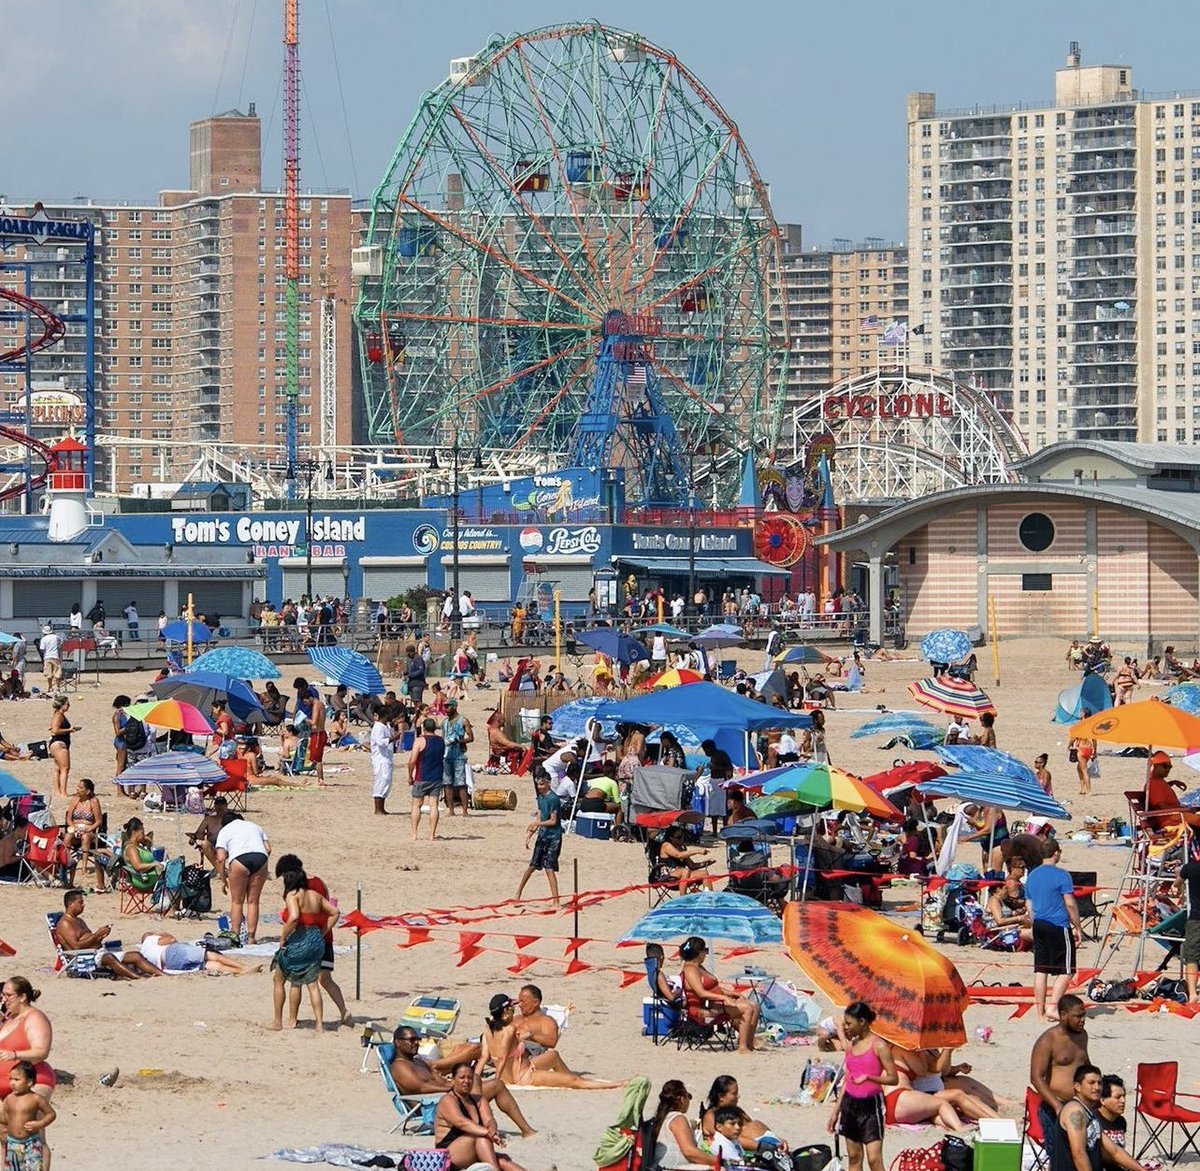 Happy Labor Day 🇺🇸 Celebrate by hitting the beach and having some fun today! @nyaquarium 🐠 opens at 10AM @originalnathans 🌭 opens at 10AM @WonderWheelPark 🎡 opens at 11AM @LunaParkNYC 🎢 opens at 11AM #coneyisland